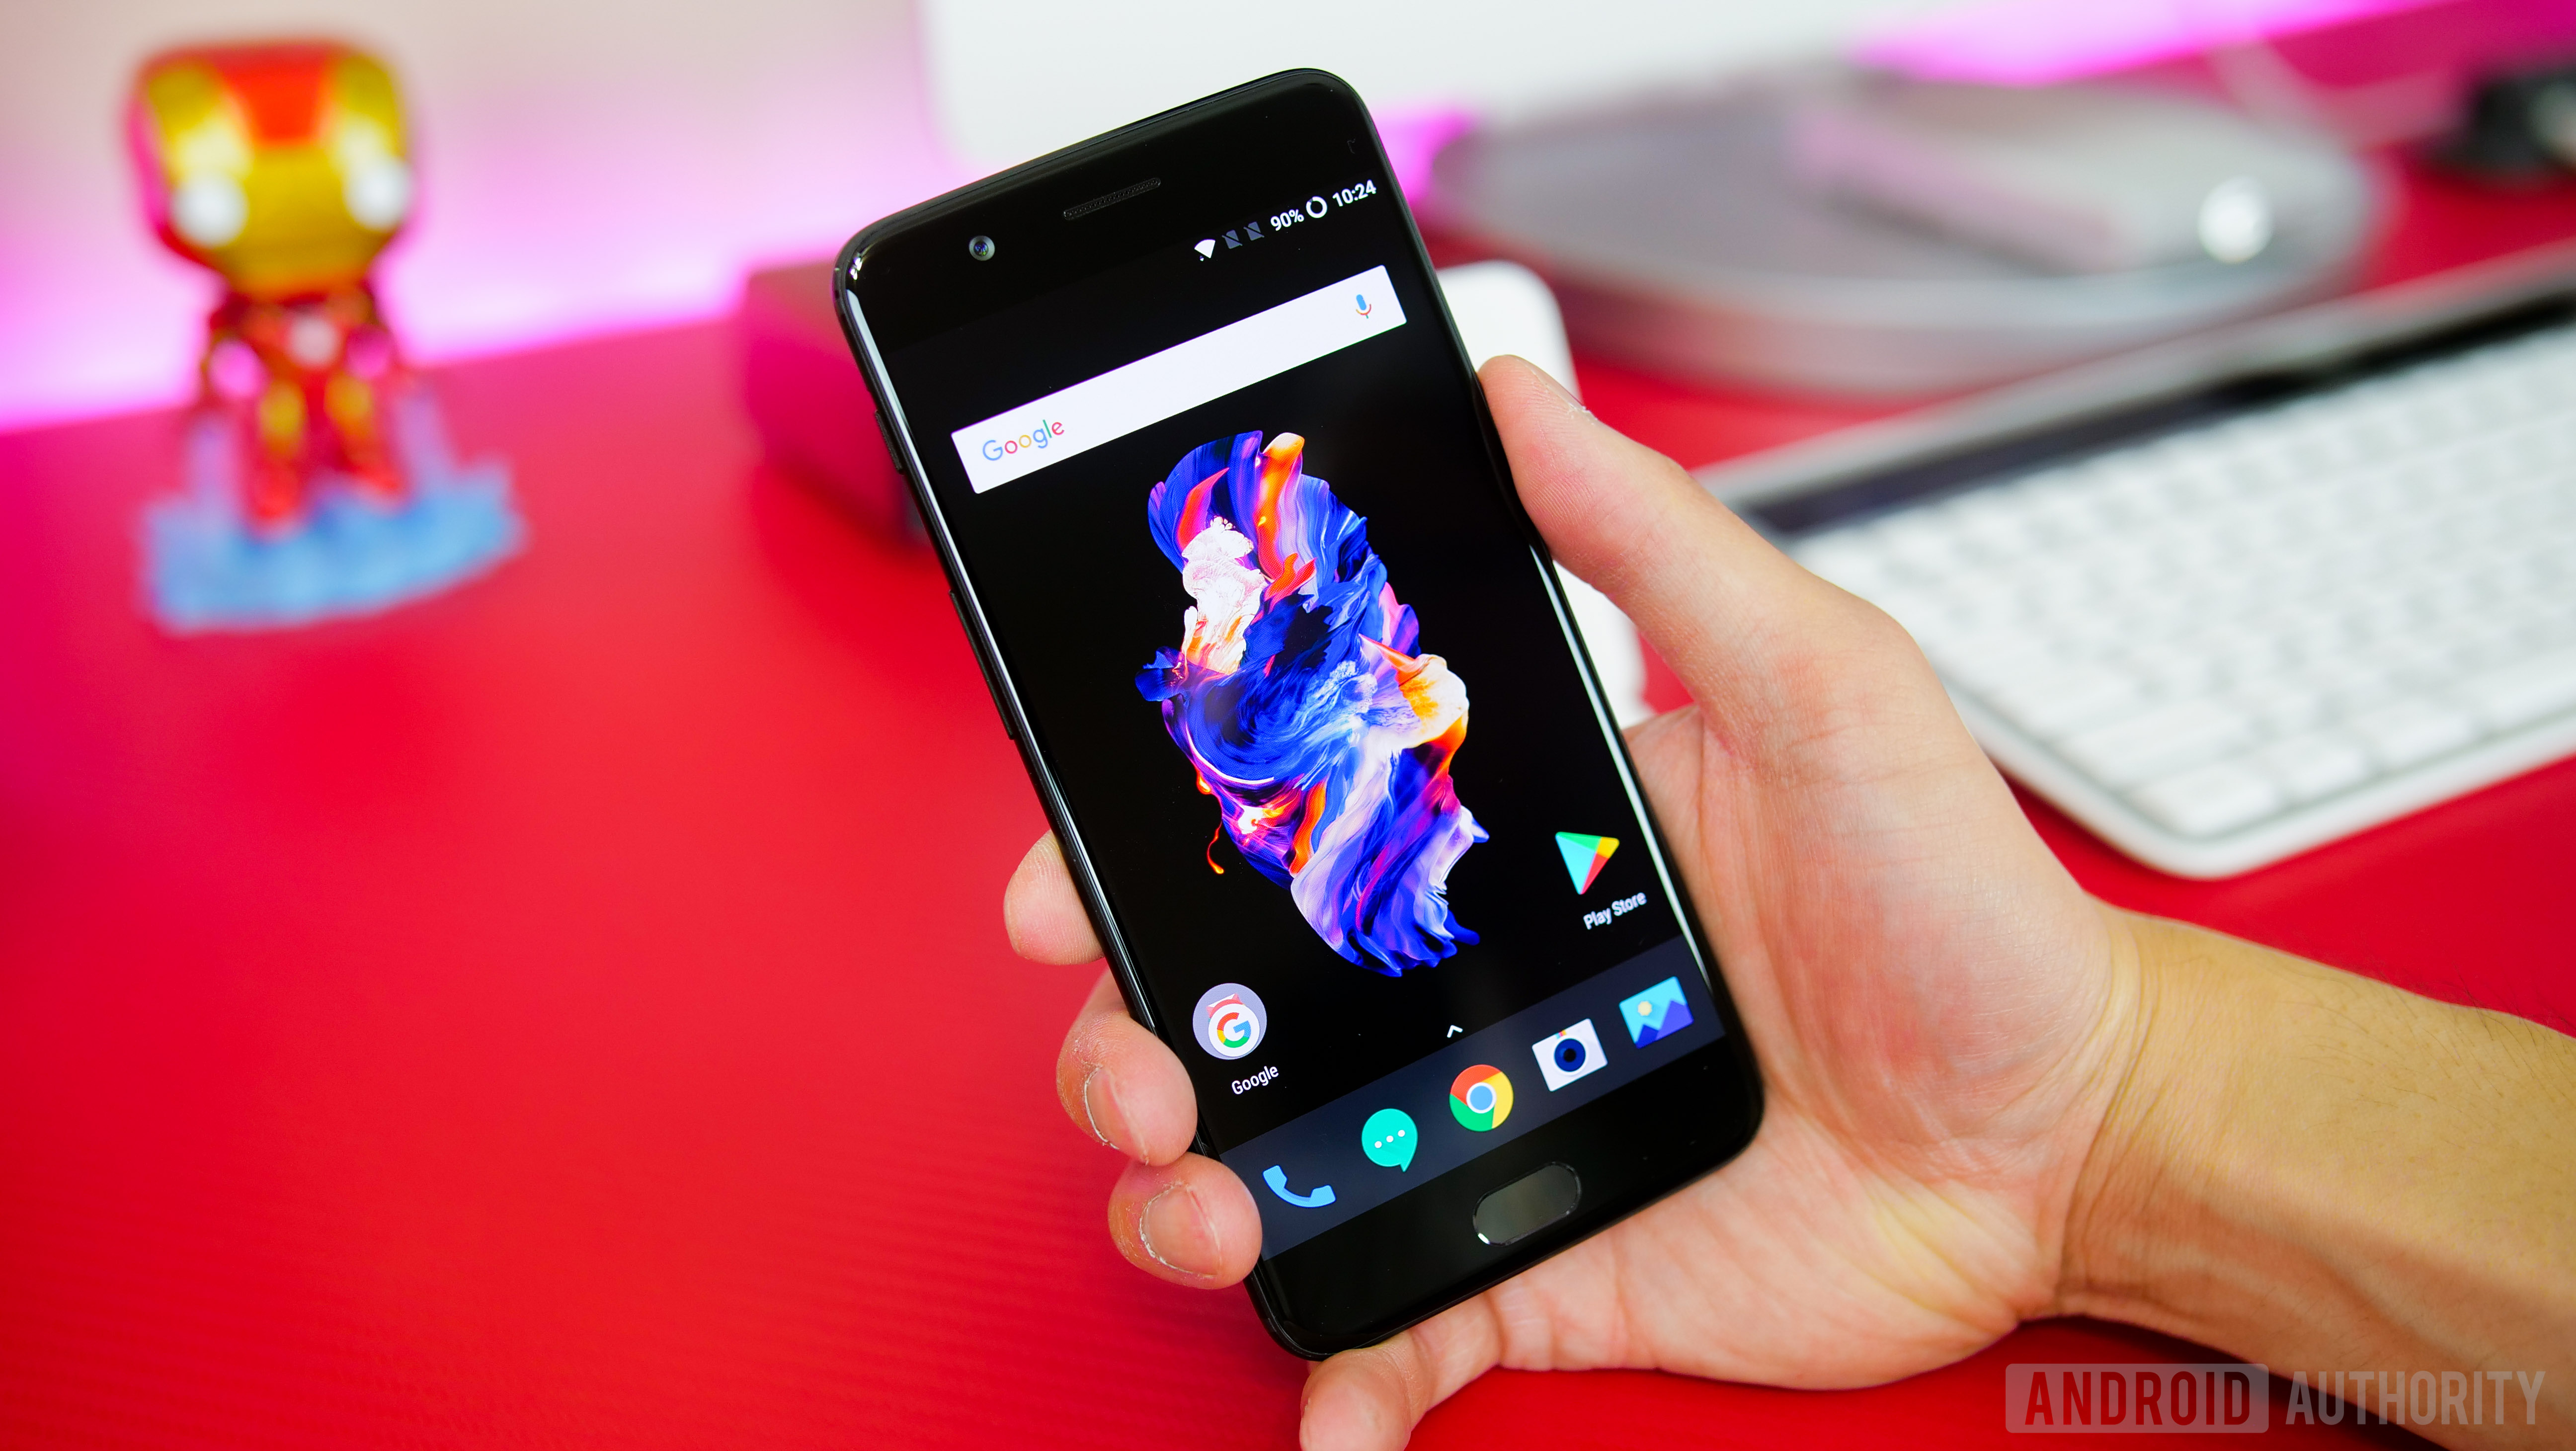 OnePlus 5 specs, price, release date, and everything else you should know